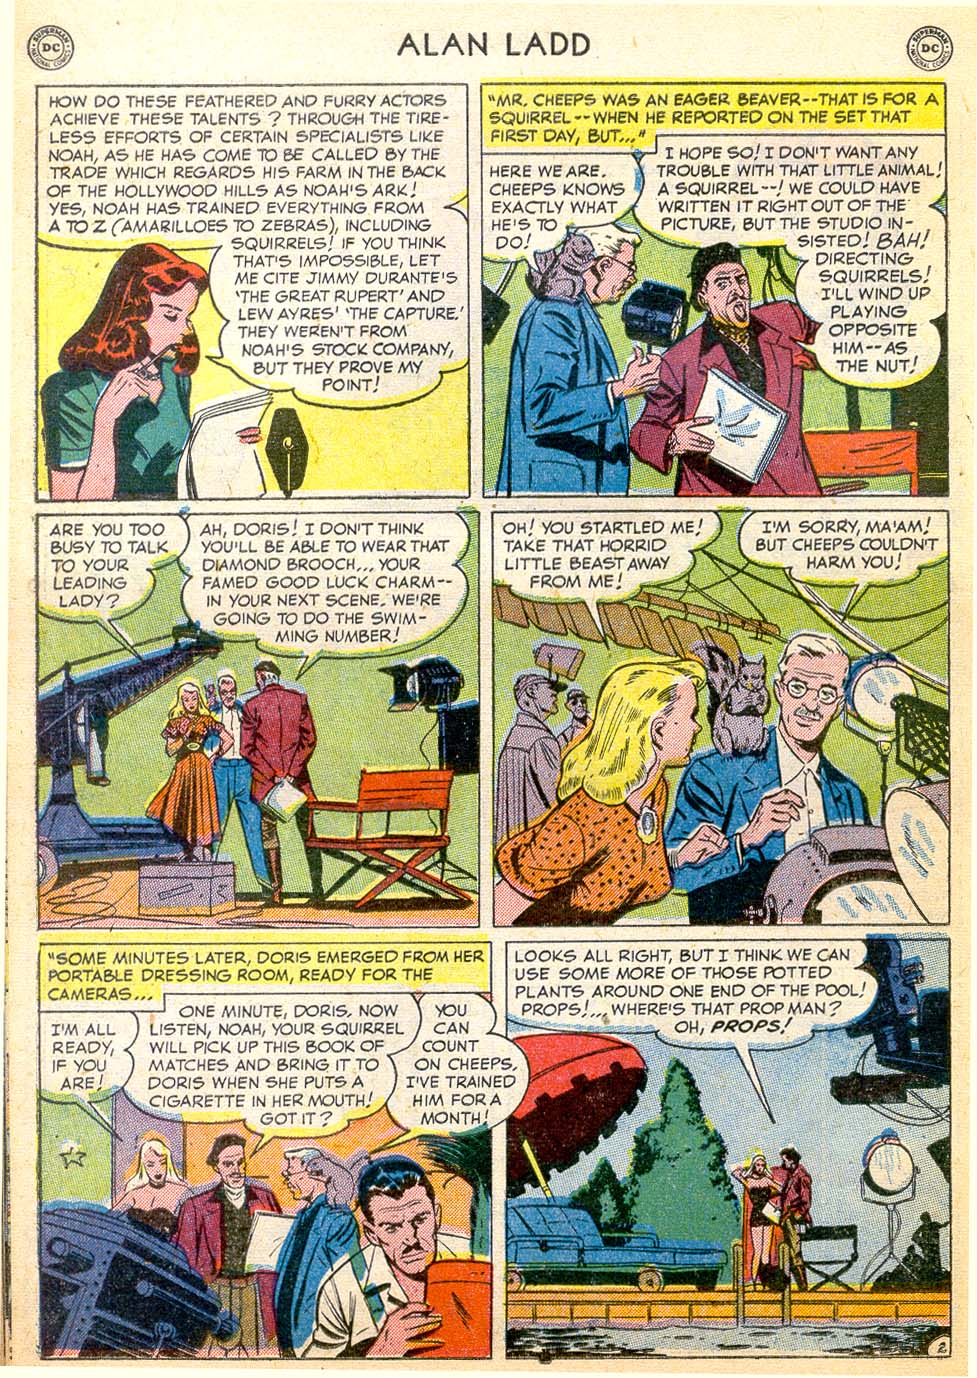 Adventures of Alan Ladd issue 9 - Page 32